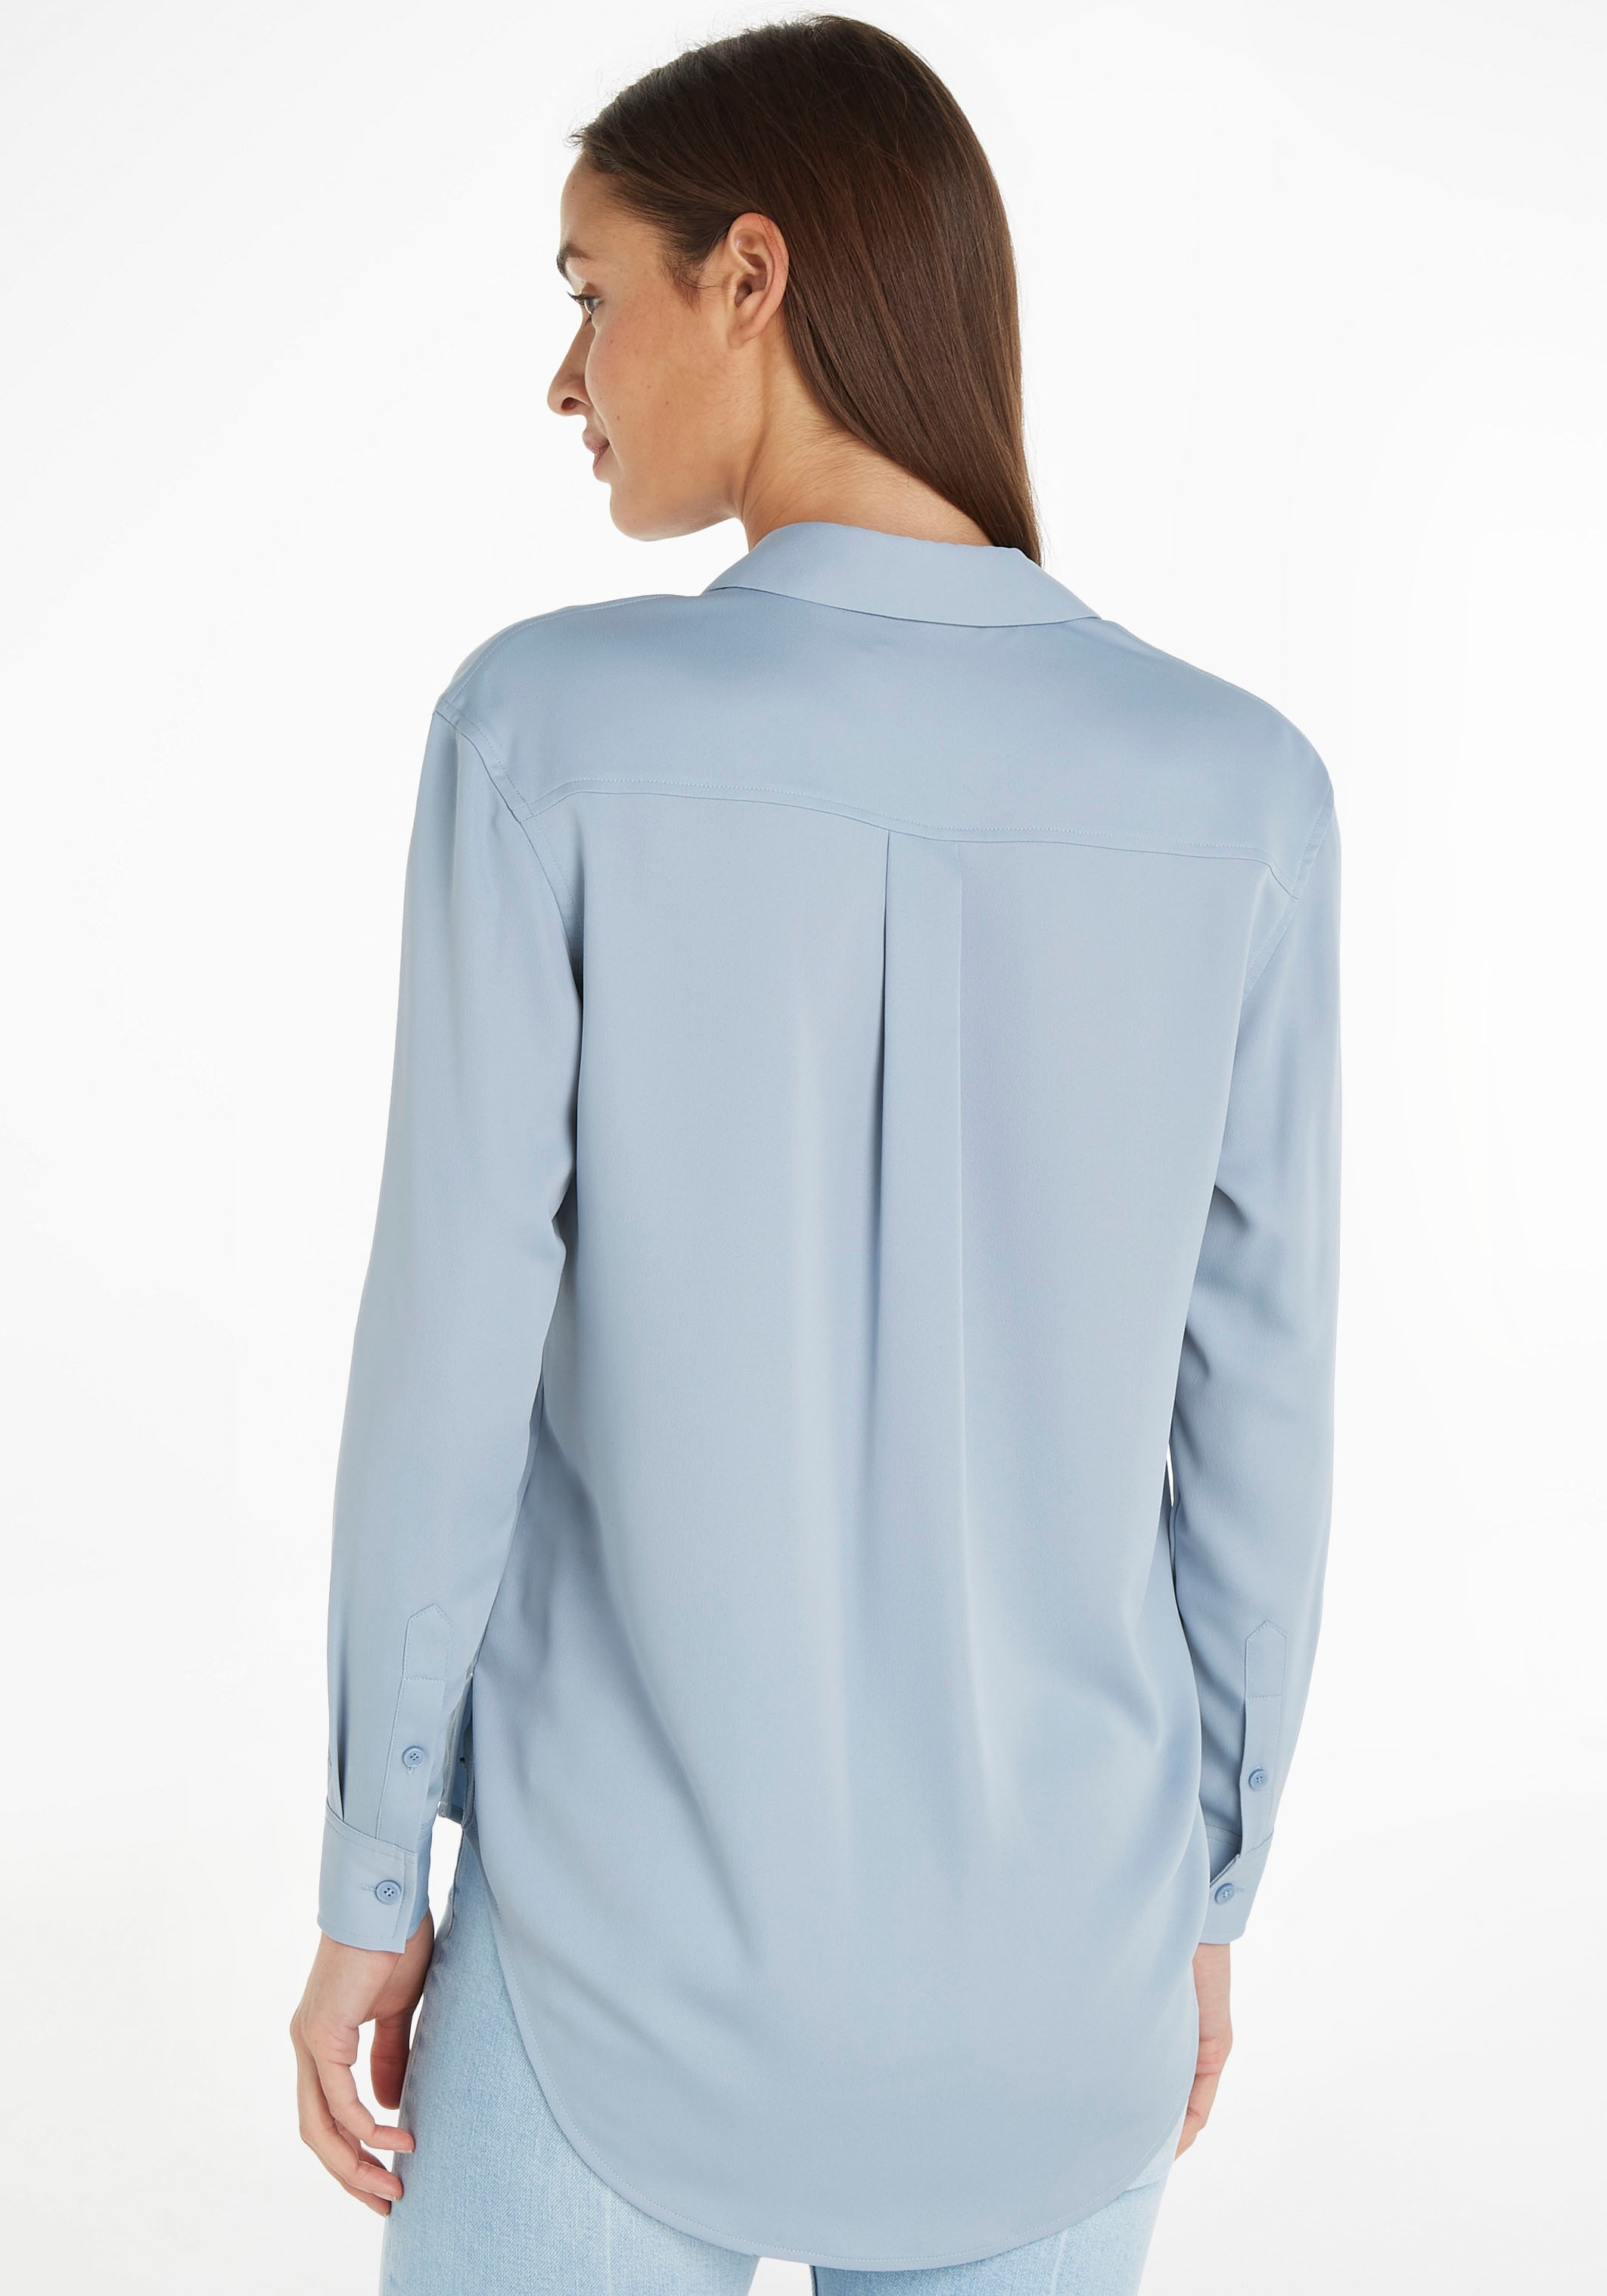 bei »RECYCLED Vokuhila-Style Klein SHIRT«, RELAXED Calvin im online Hemdbluse CDC OTTO